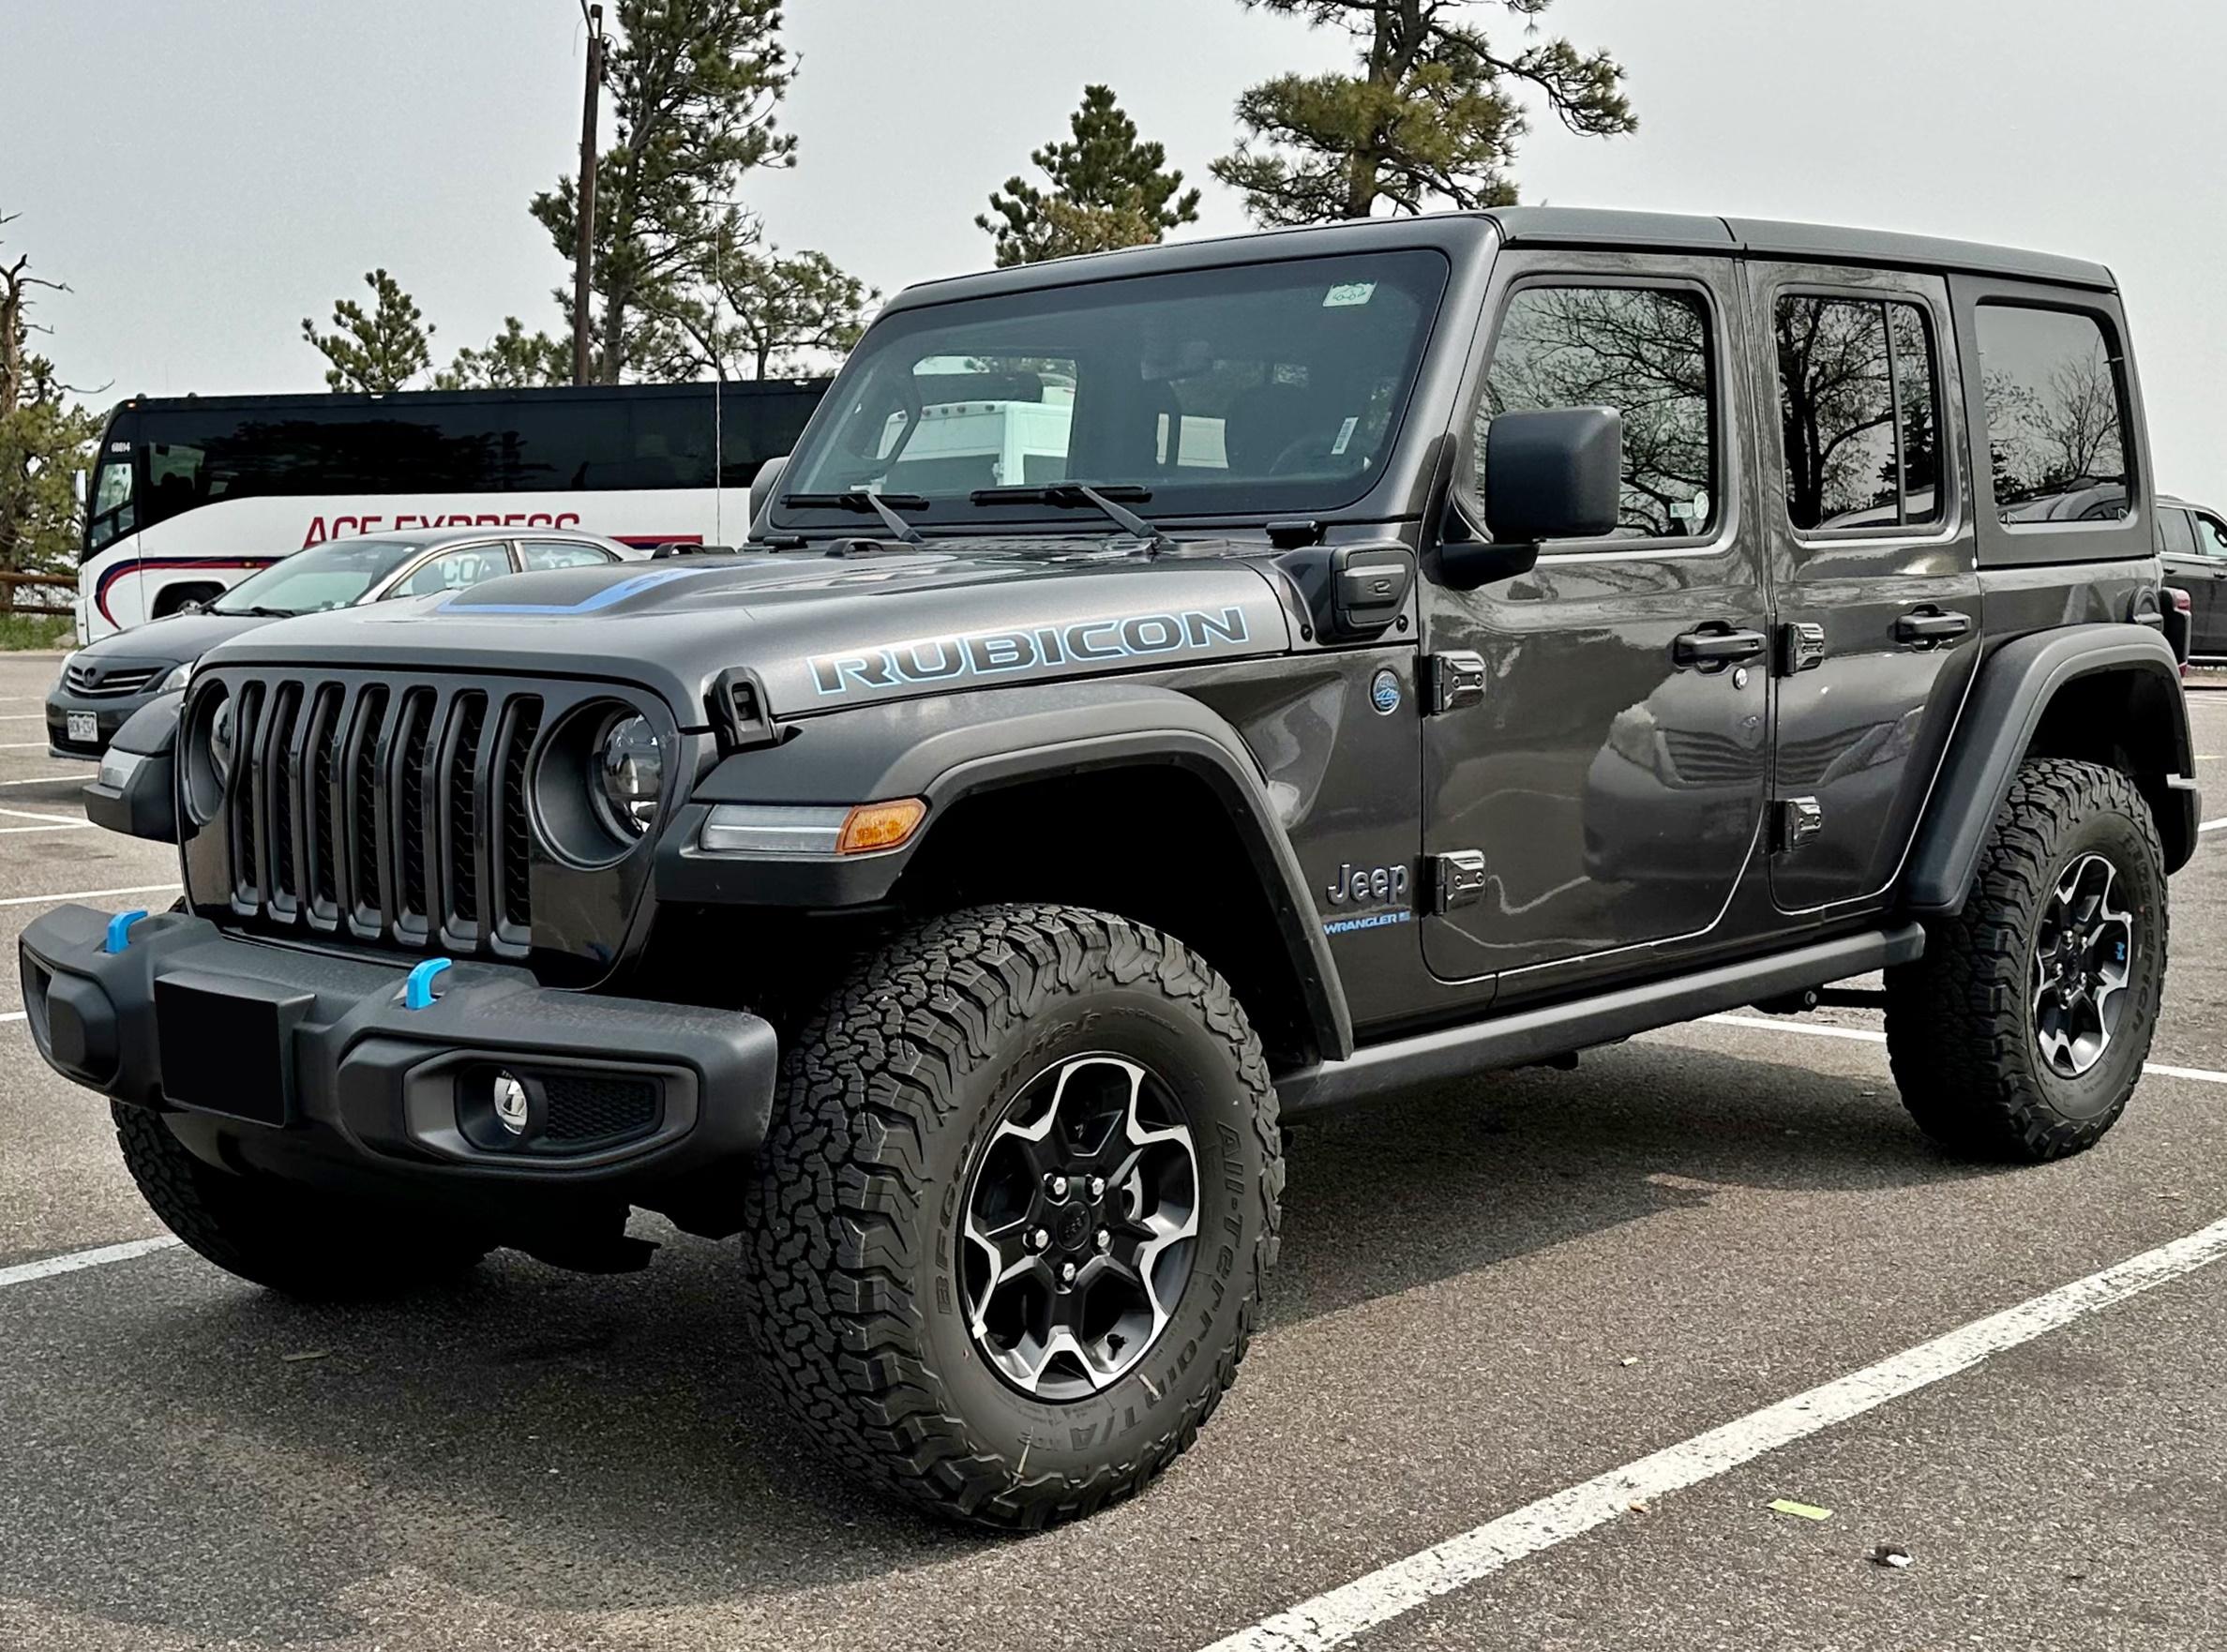 - Tips for Finding the Best Deal on a Jeep Wrangler Hard Top